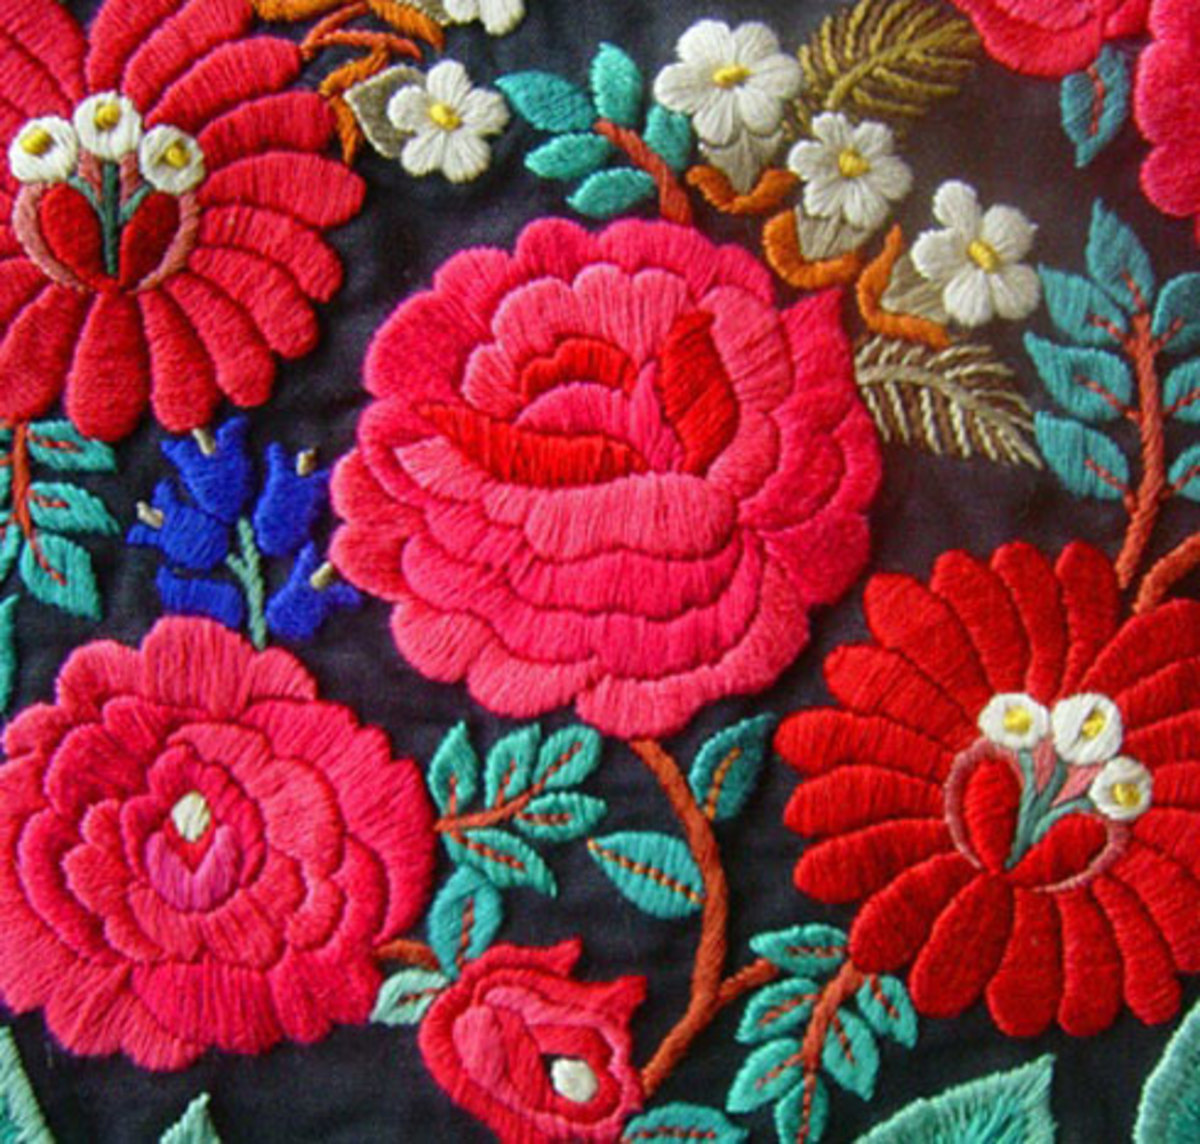 Embroidery of India- The Symbols, Motifs and Colors | HubPages
